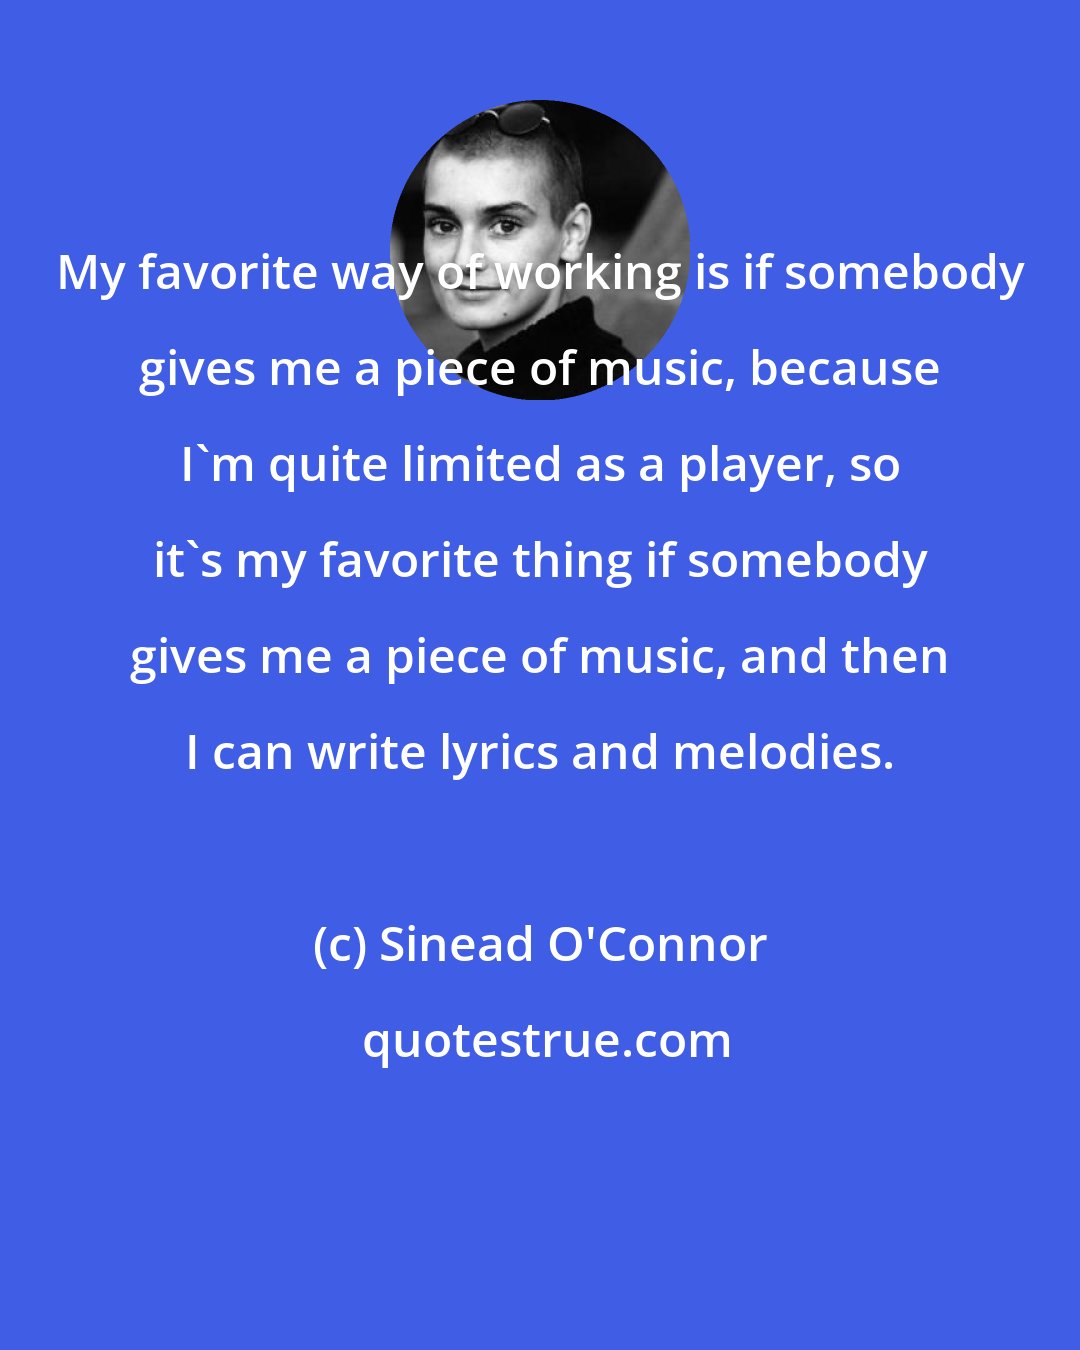 Sinead O'Connor: My favorite way of working is if somebody gives me a piece of music, because I'm quite limited as a player, so it's my favorite thing if somebody gives me a piece of music, and then I can write lyrics and melodies.